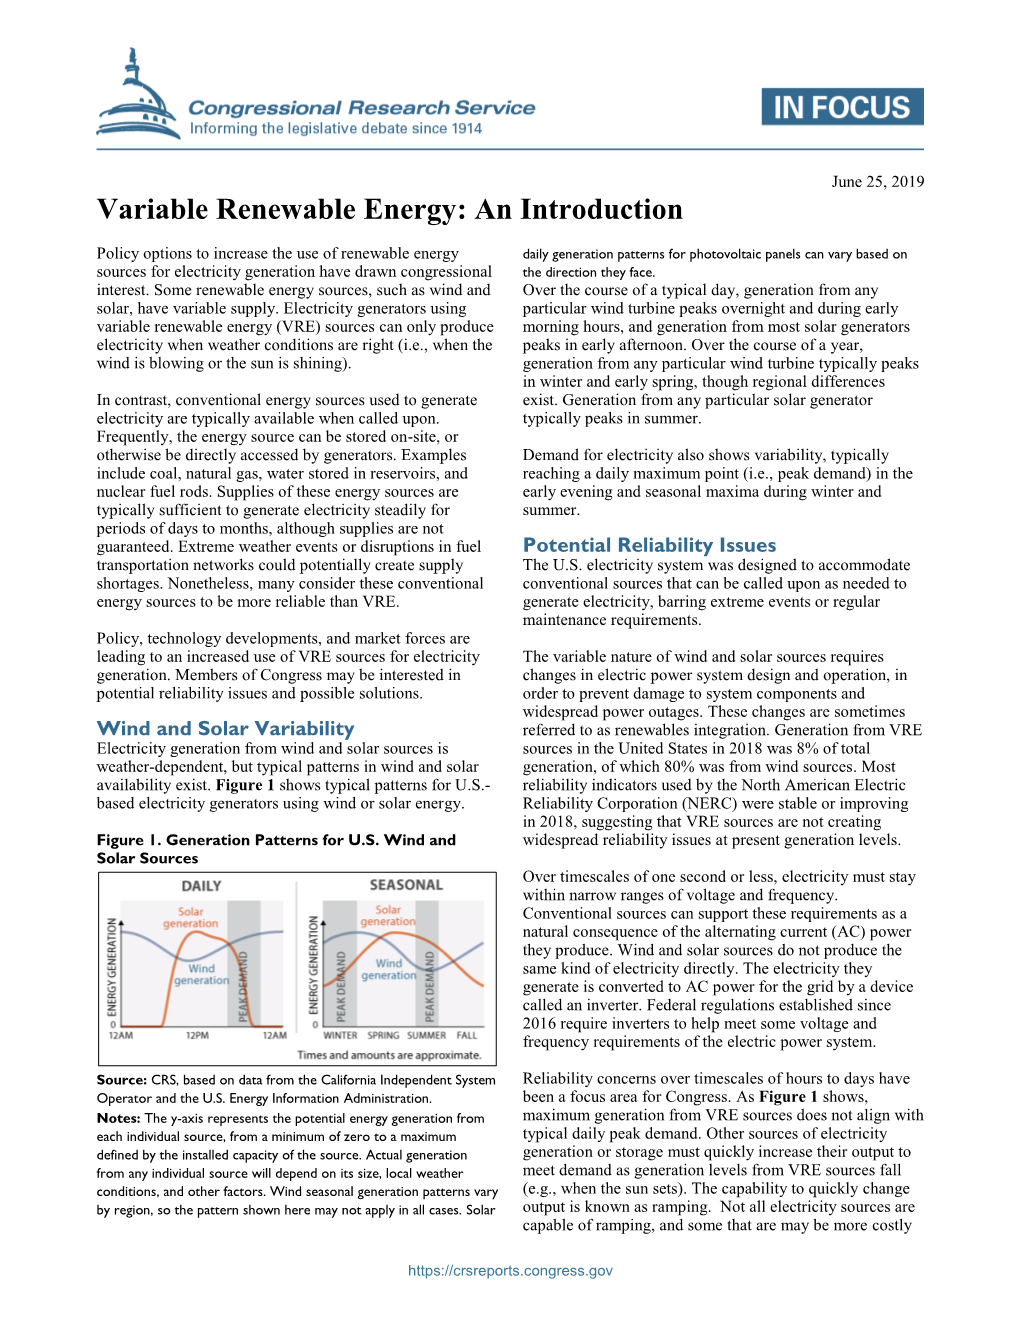 Variable Renewable Energy: an Introduction